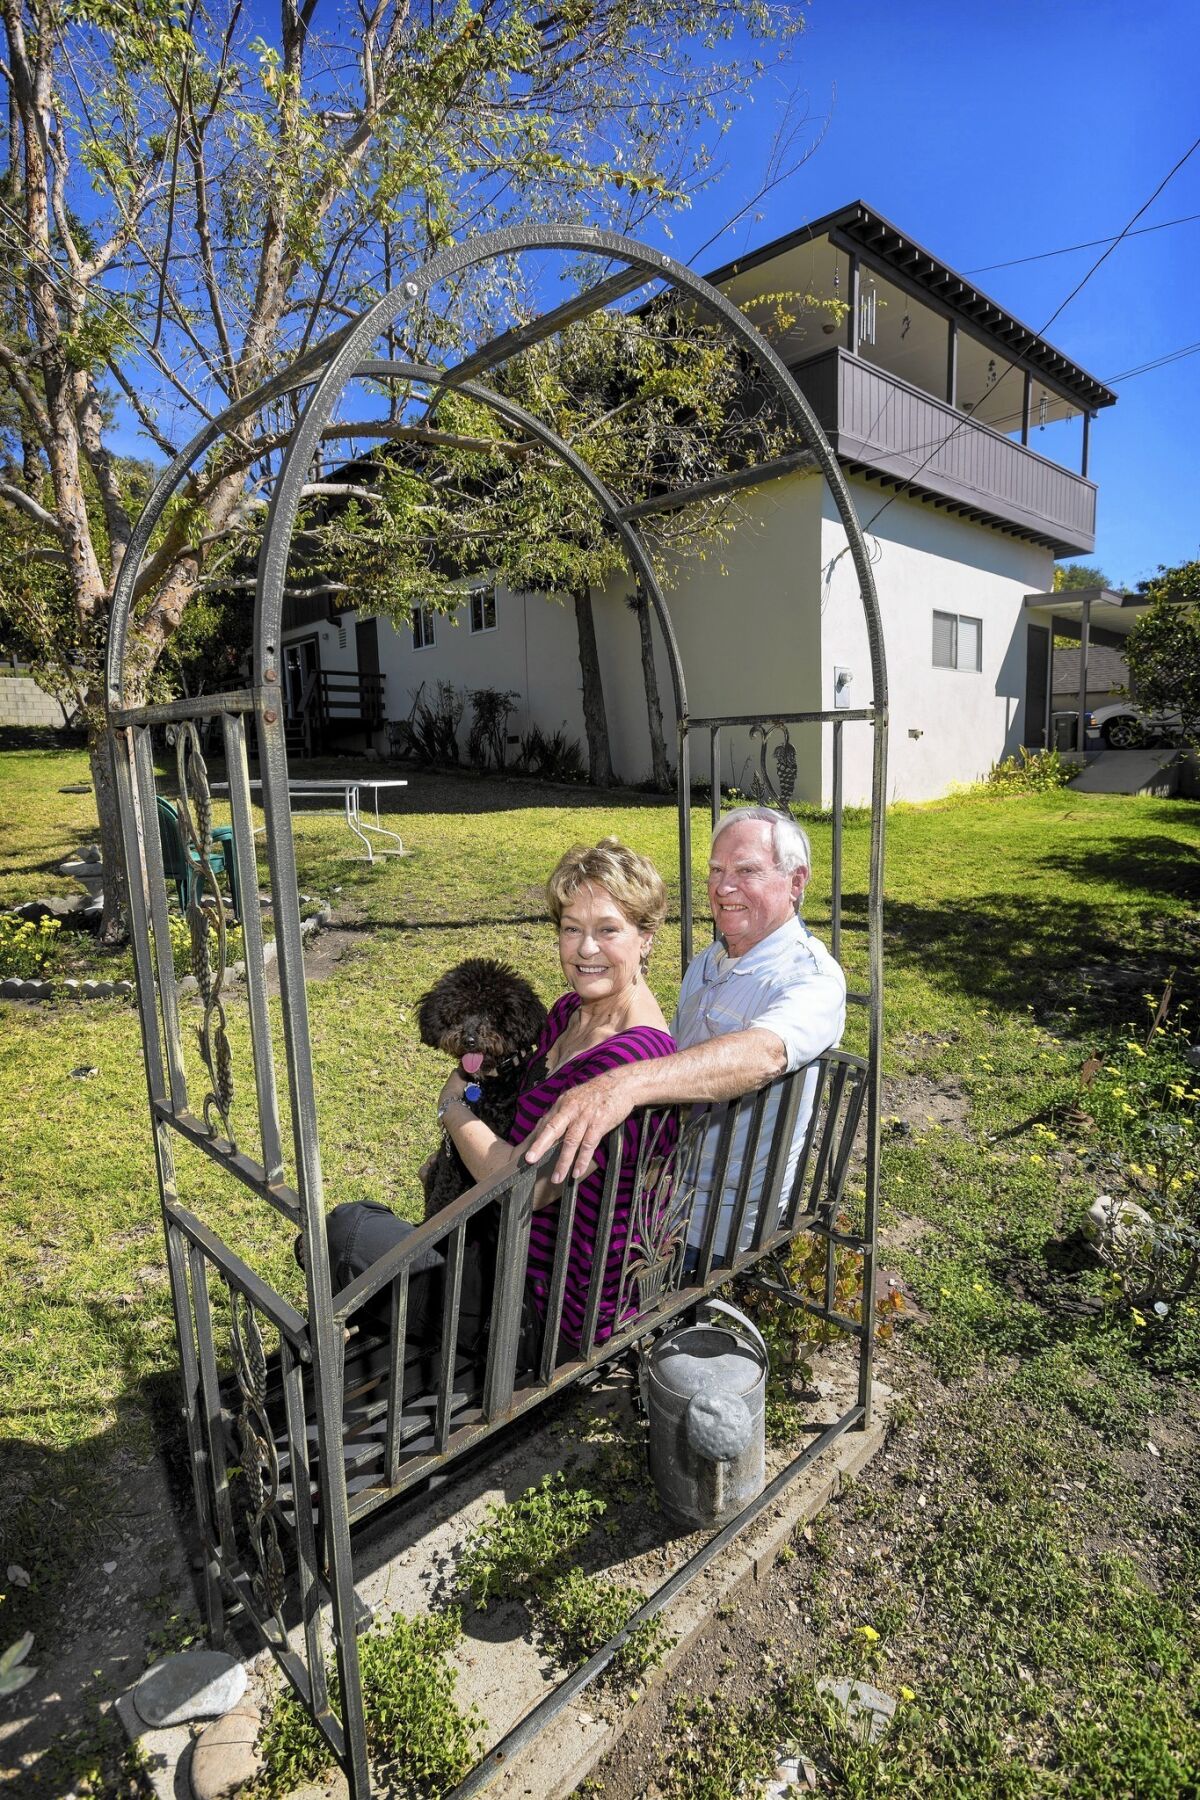 Retirees Wana and Owen Klasen, holding their dog Jager, at their home in Fillmore in Ventura County. They recently got a home equity line of credit that they used to paint and re-roof their house. They couldn't qualify for the credit line last year, but rising home prices made it possible this year.